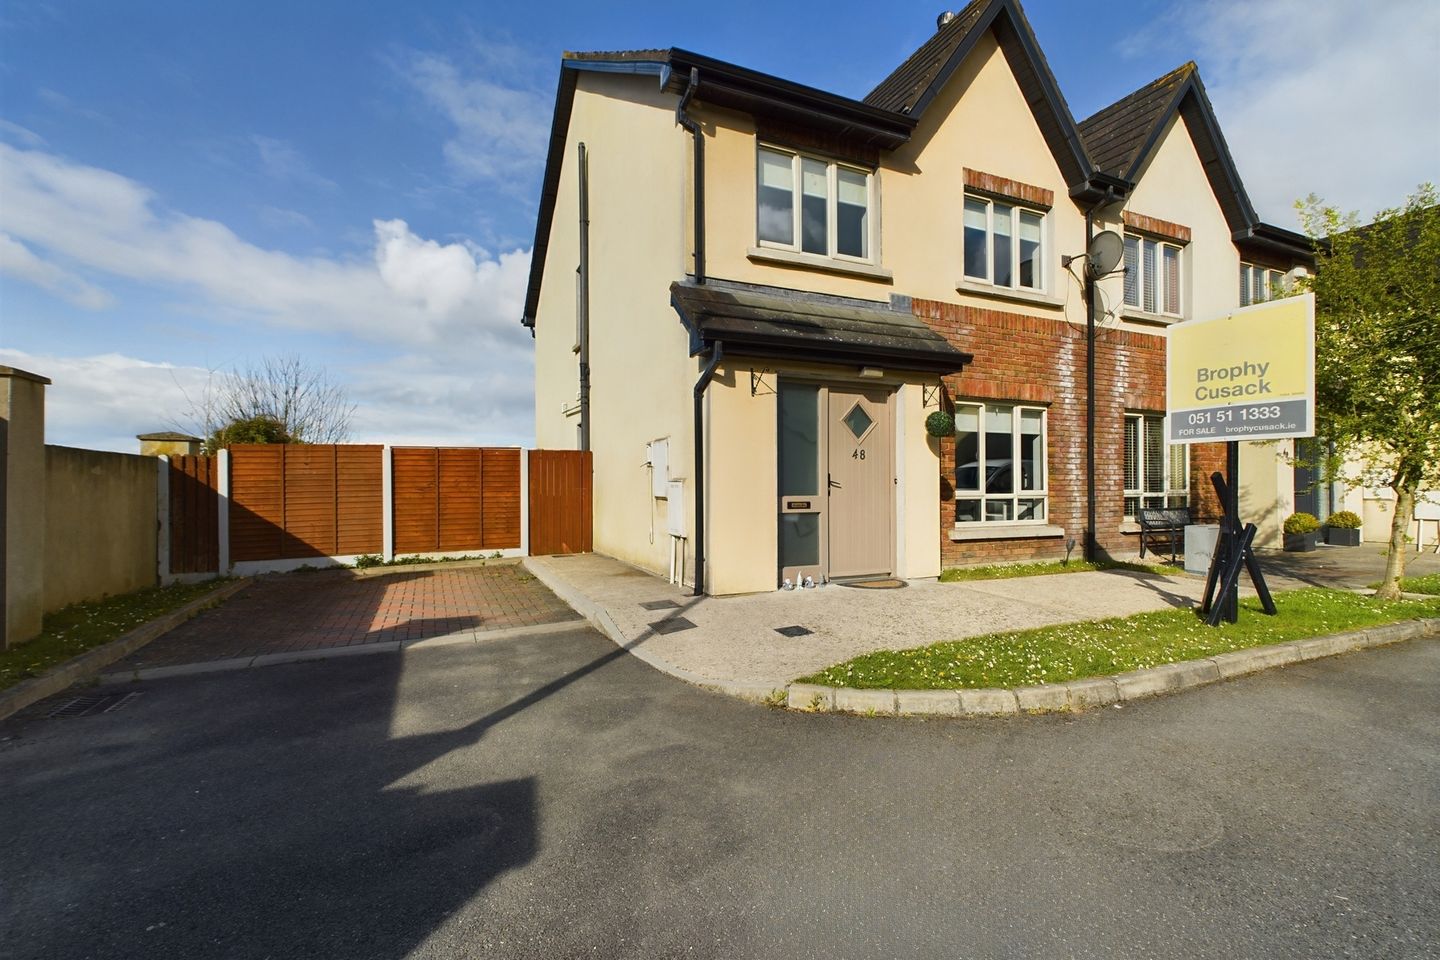 48 Castle Heights, Carrick-on-Suir, Co. Tipperary, E32XN67